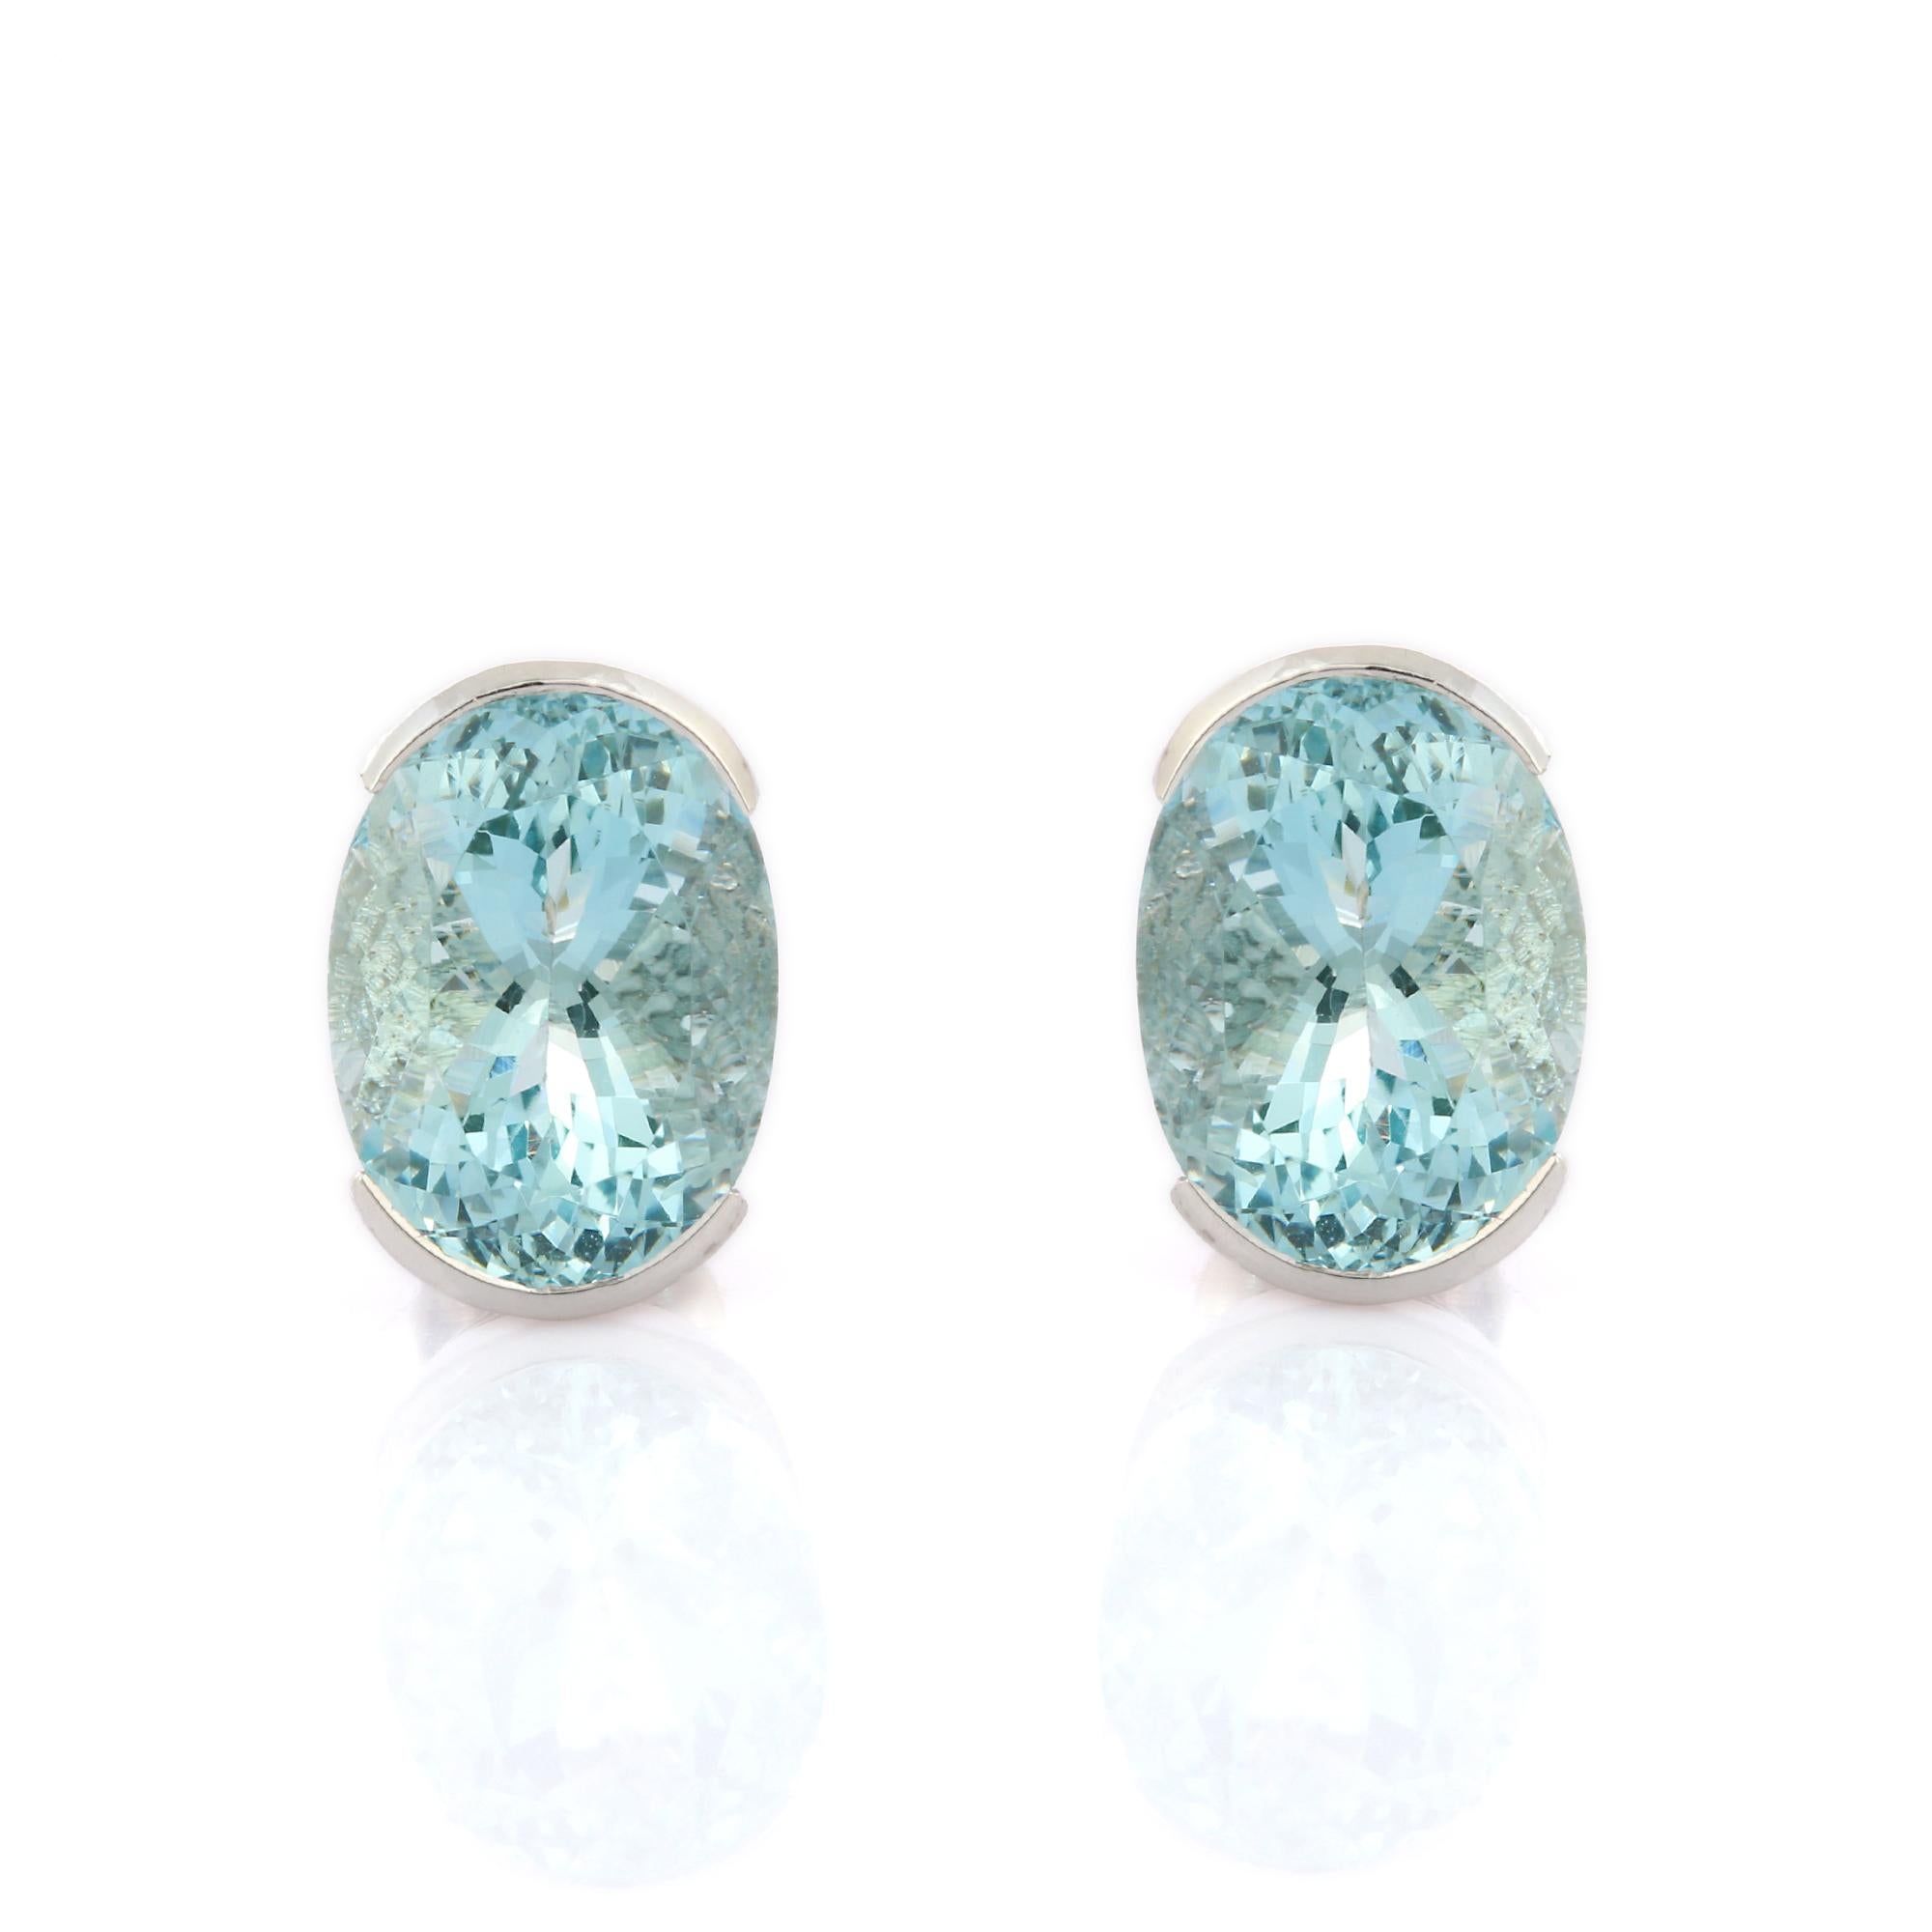 Studs create a subtle beauty while showcasing the colors of the natural precious gemstones.
Brilliant cut statement oval aquamarine studs in 18K gold. Embrace your look with these stunning pair of earrings suitable for any occasion to complete your